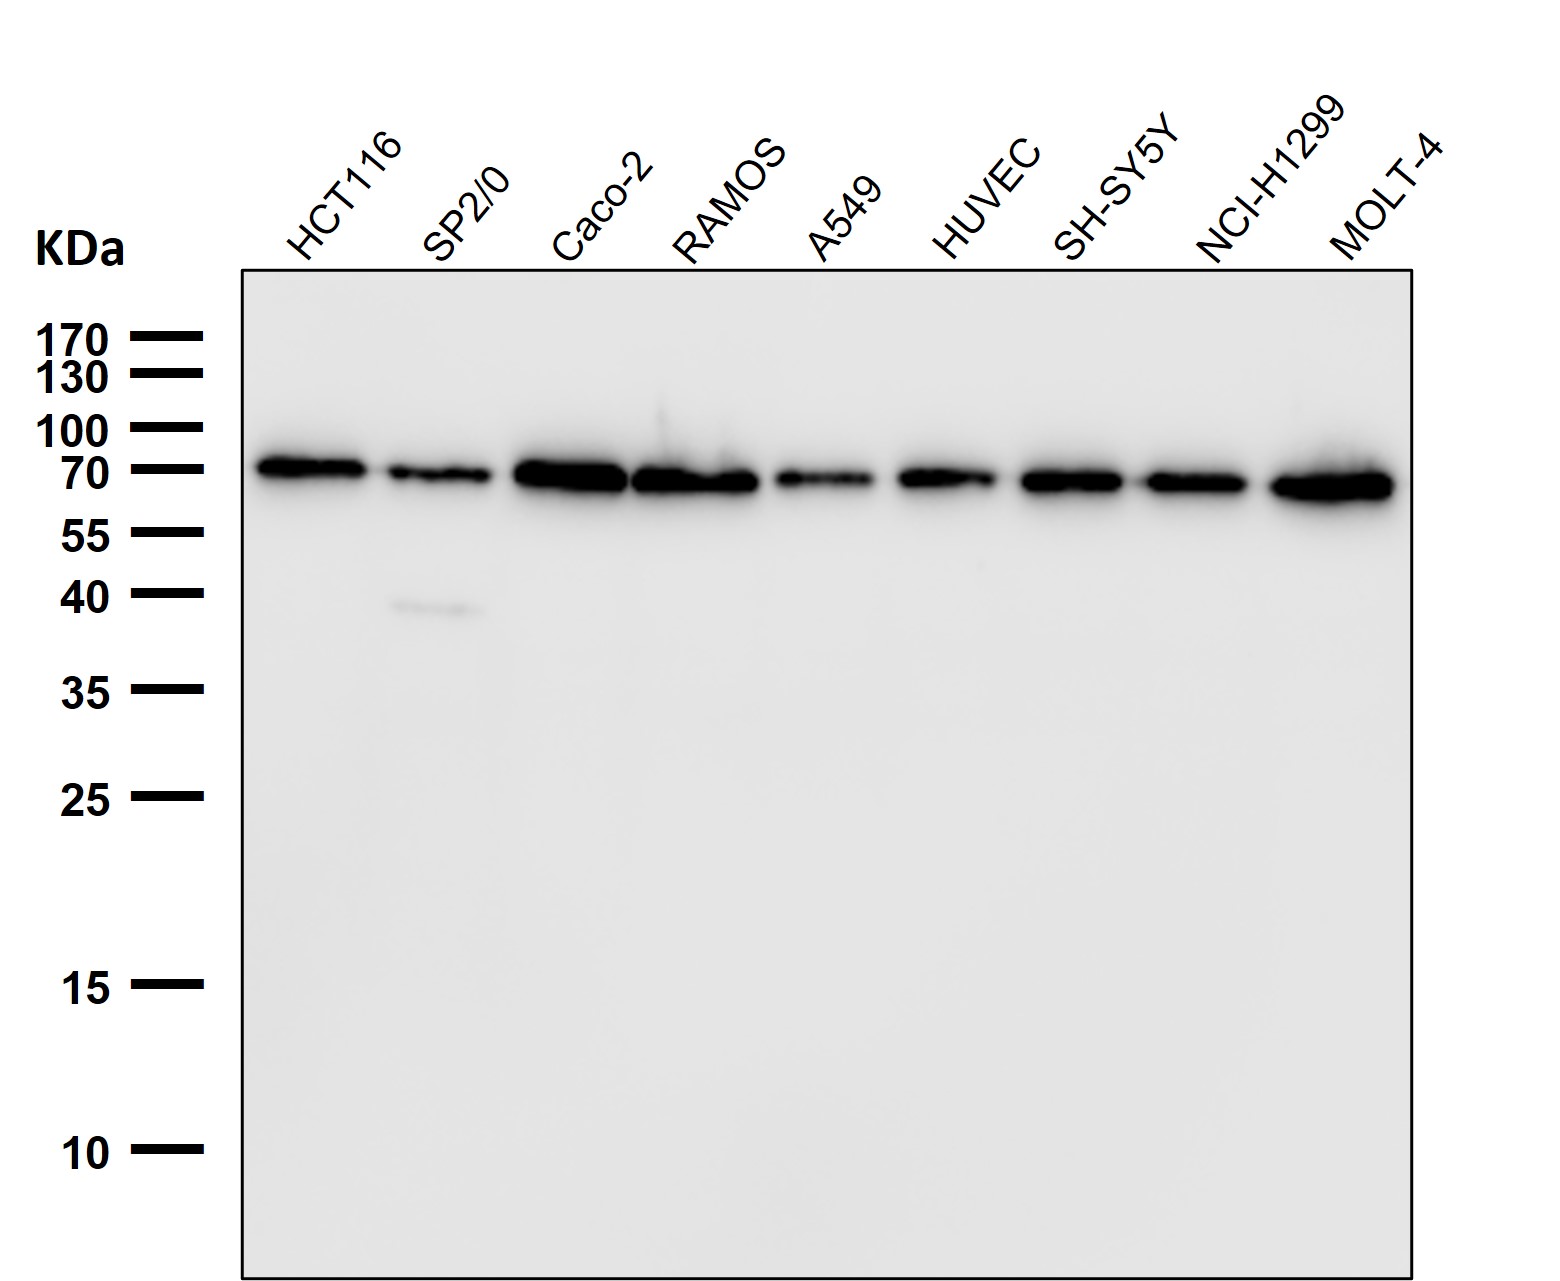 All lanes use AB0054 Lamin B1 Antibody at 1:10000 dilution for 1 hour at room temperature.